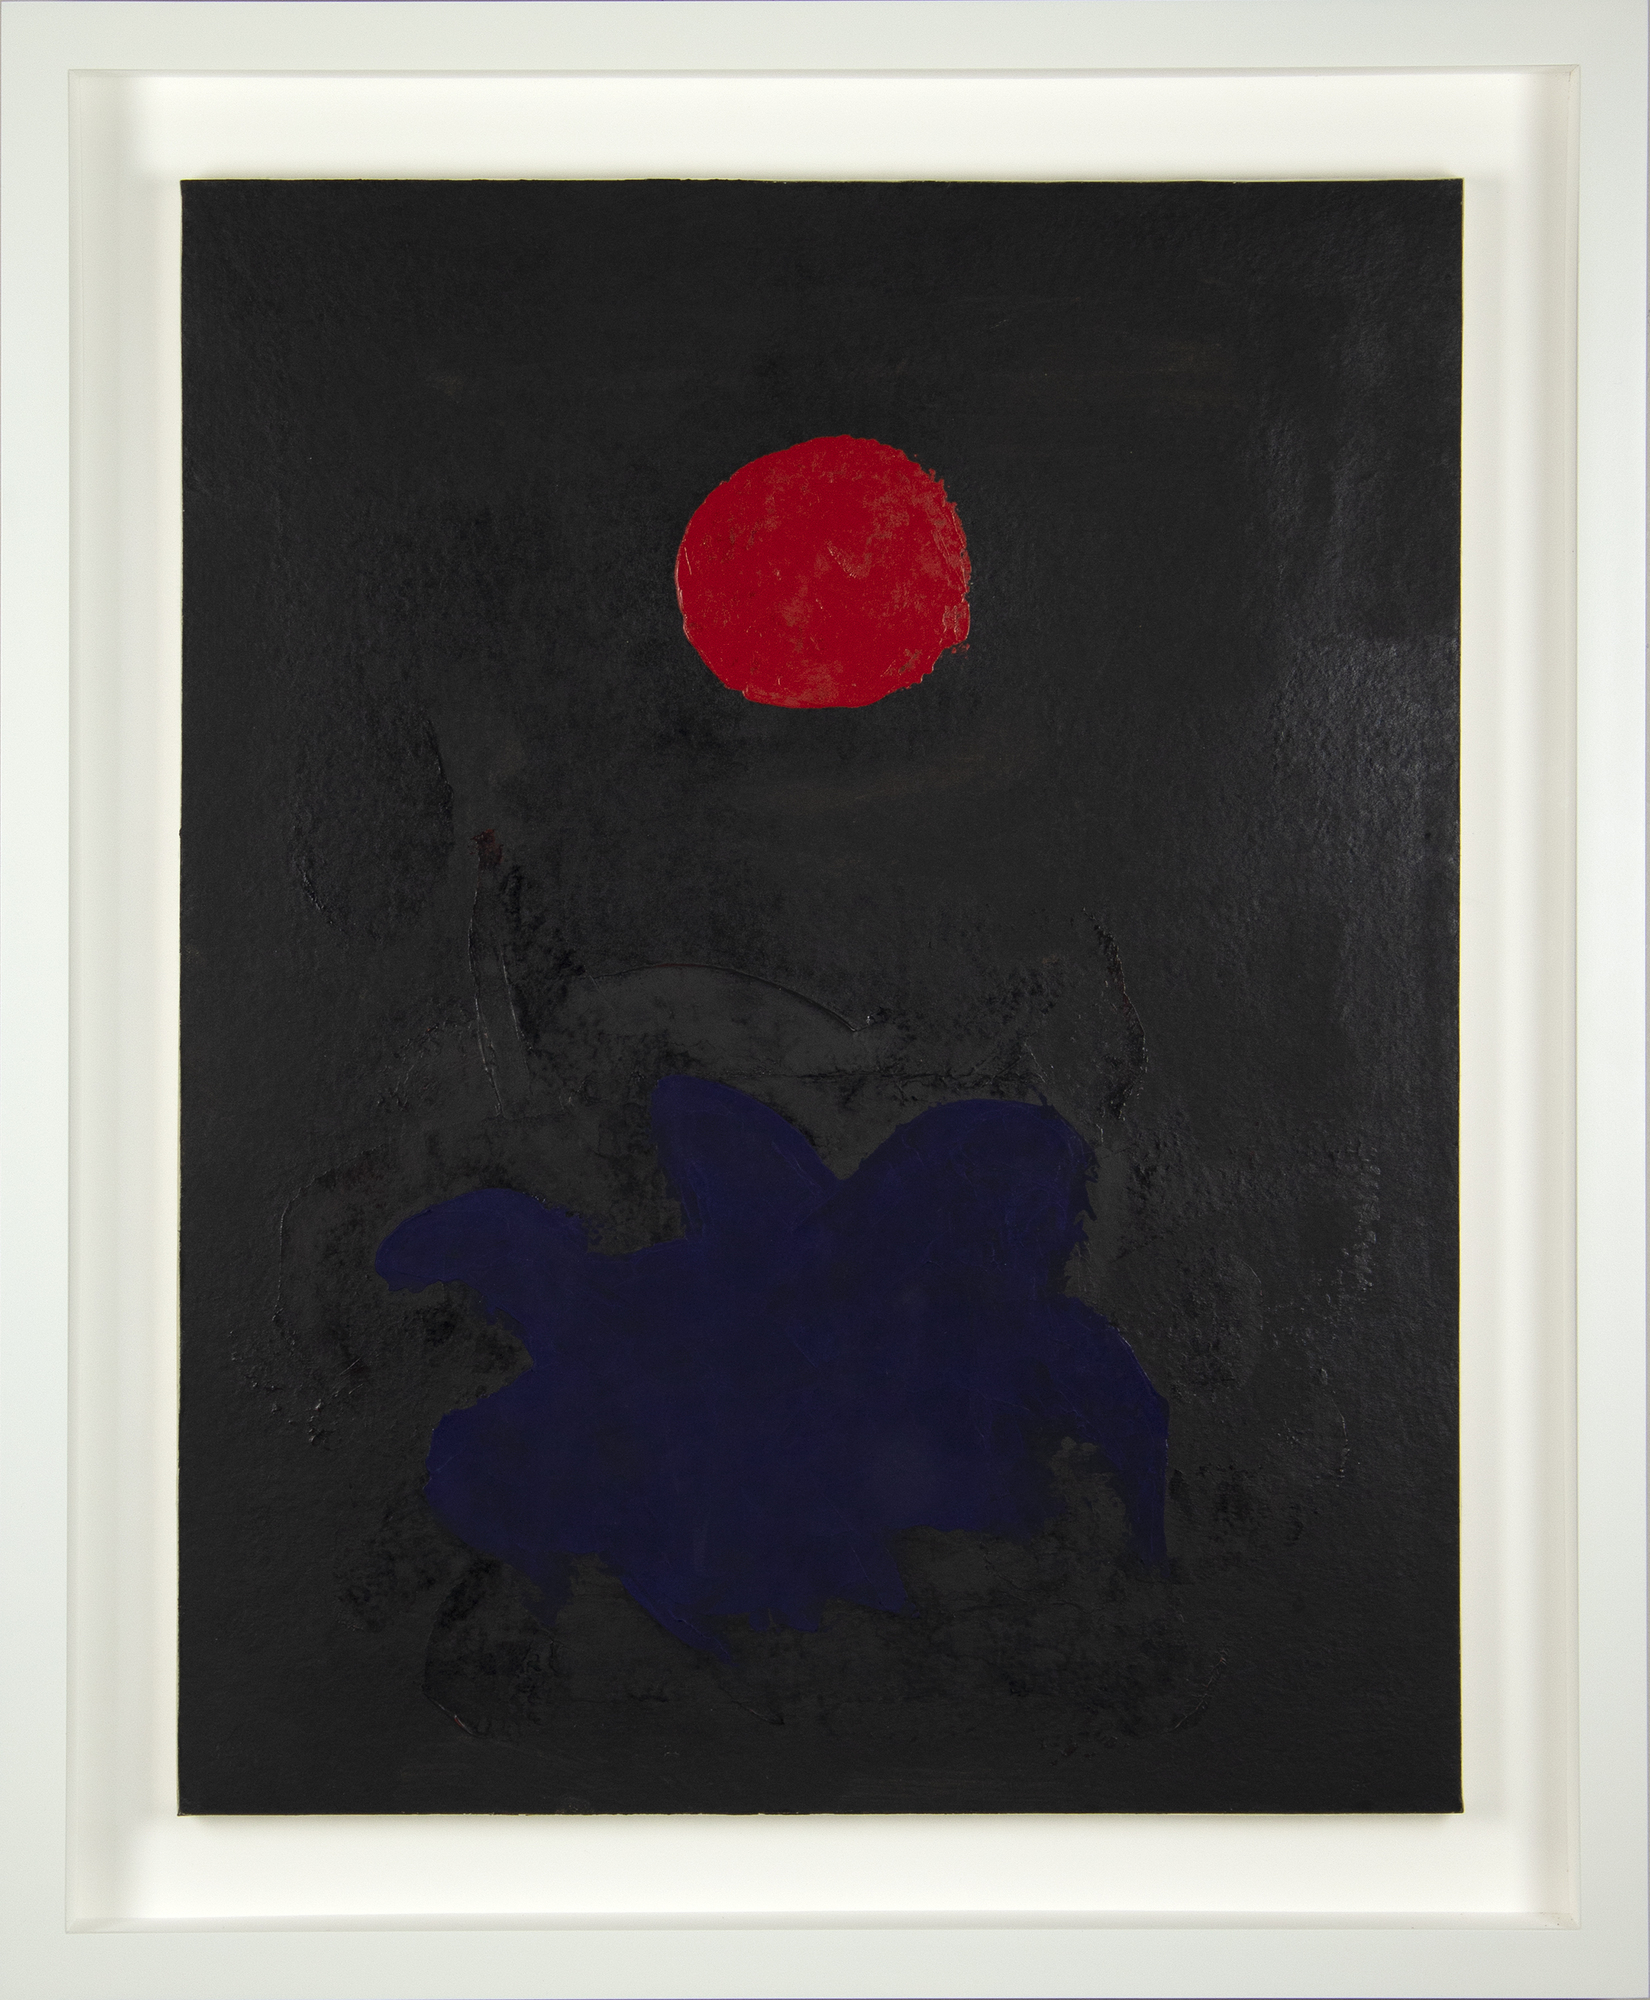 Gottlieb was a first-generation member of the Abstract Expressionists. “Blue on Black” is from his trademark “Burst” series. Like fellow Ab Ex artists including Pollock who settled into their signature style late in their careers, it was not until 1956 that Gottlieb focused on these burst paintings.&lt;br&gt;&lt;br&gt;This painting showcases the lyricism that he found within the “Burst” paintings by simplifying color and form. In this painting, the shapes and color coalesce to produce harmony and depth within the visual landscape of the canvas.&lt;br&gt;&lt;br&gt;Gottlieb had an amazing 56 solo exhibitions during his long career and his works are included in over 140 museums throughout the world.